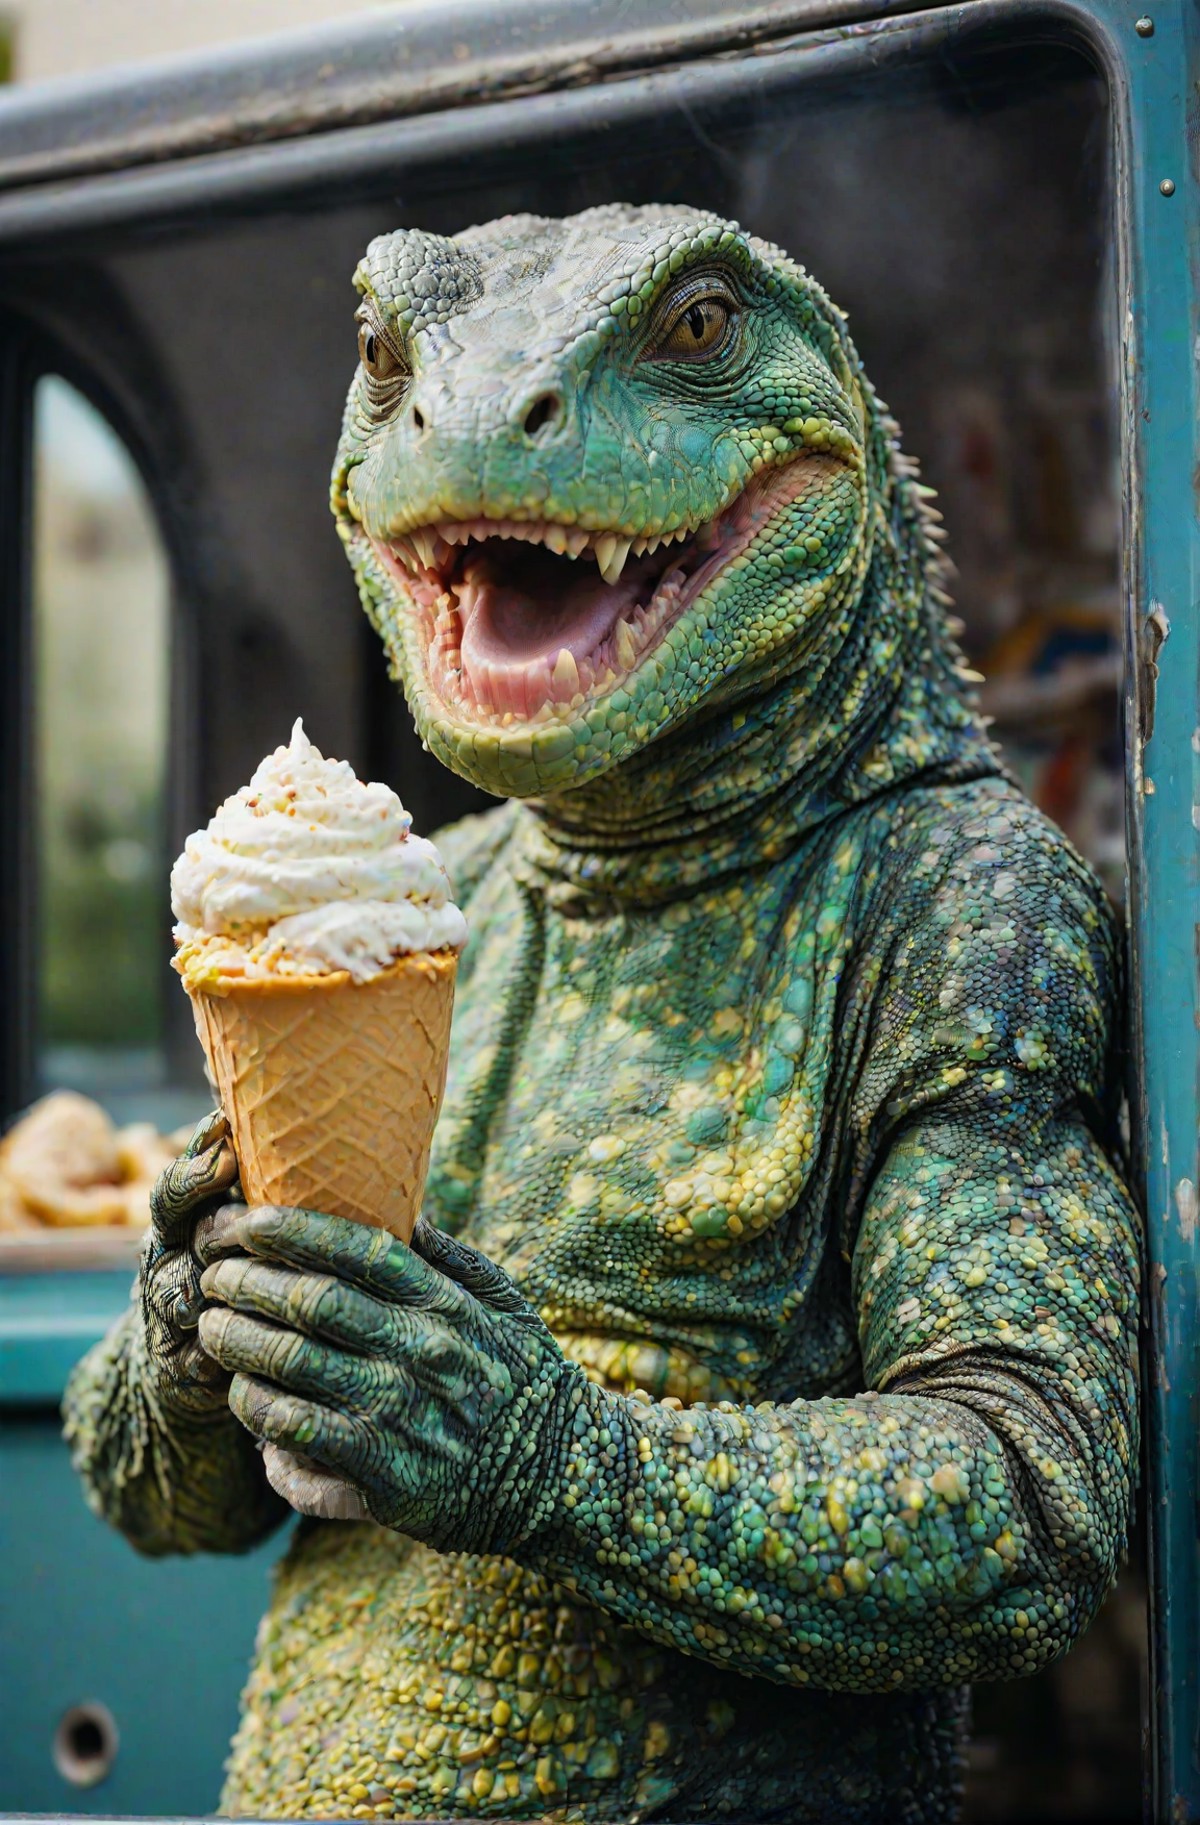 a beautiful high definition crisp portrait of old (reptile:1.2) skin selling icecream from a truck in a suburban area, tak...